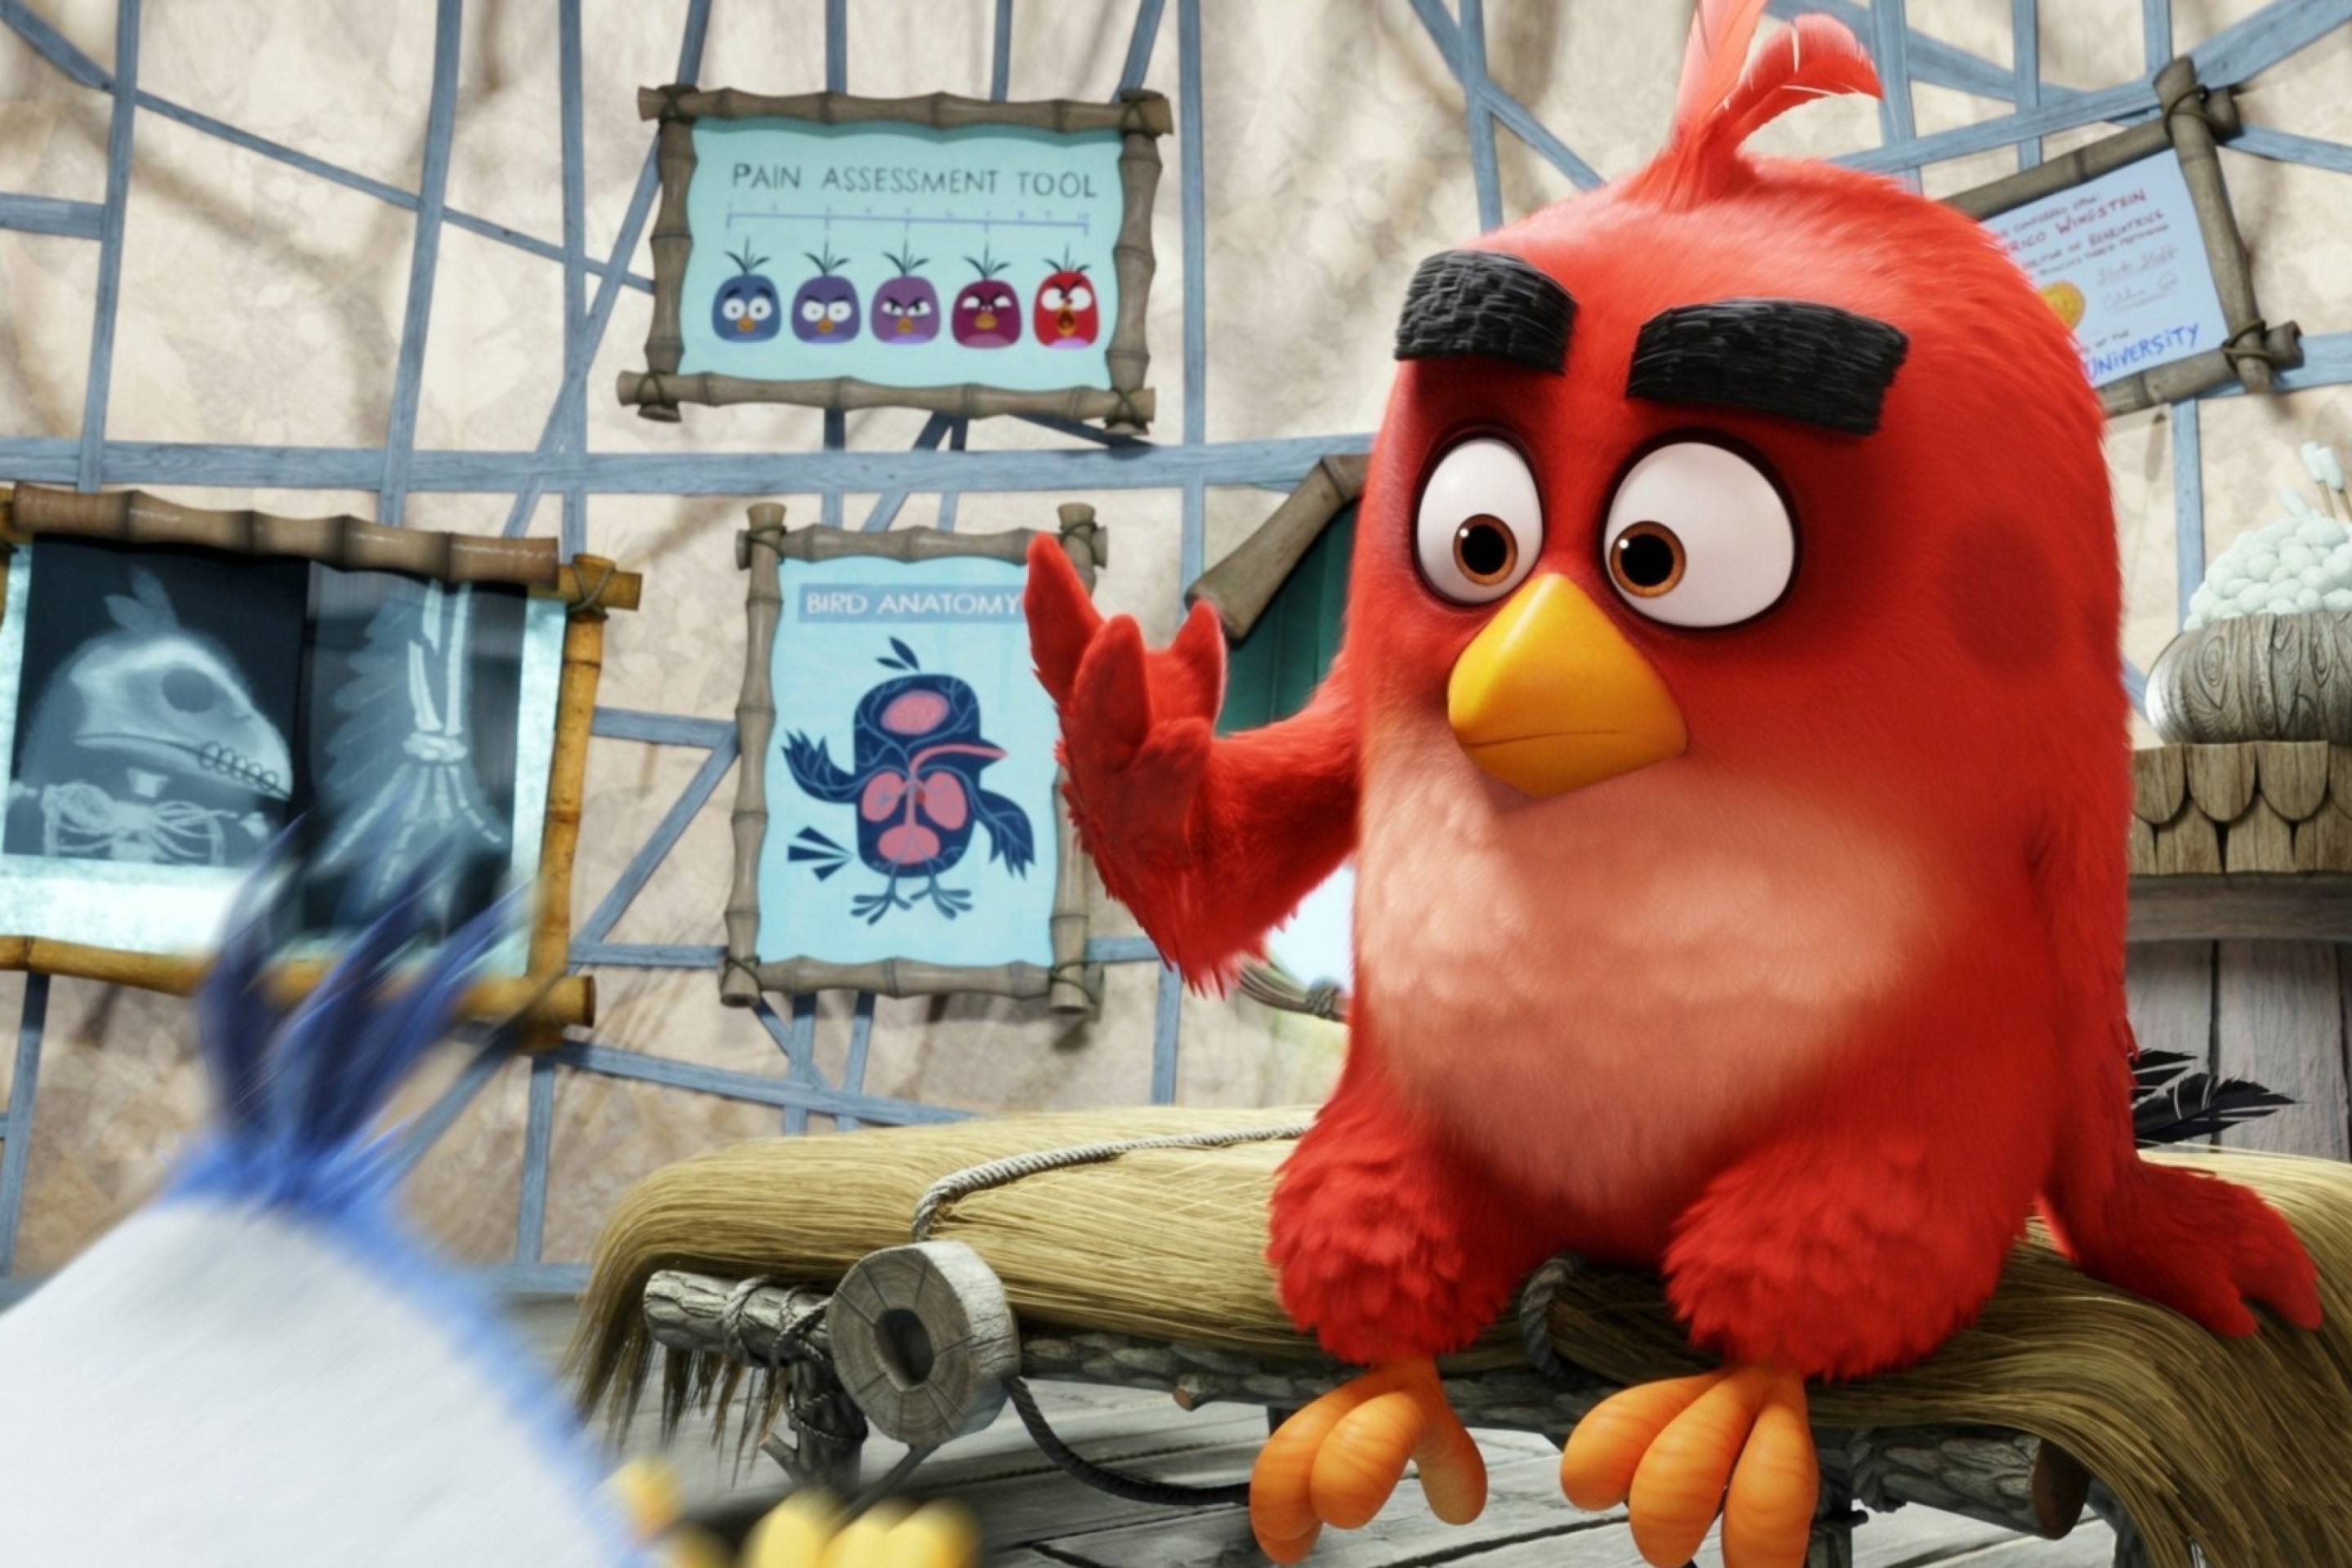 Das Angry Birds Red Wallpaper 2880x1920